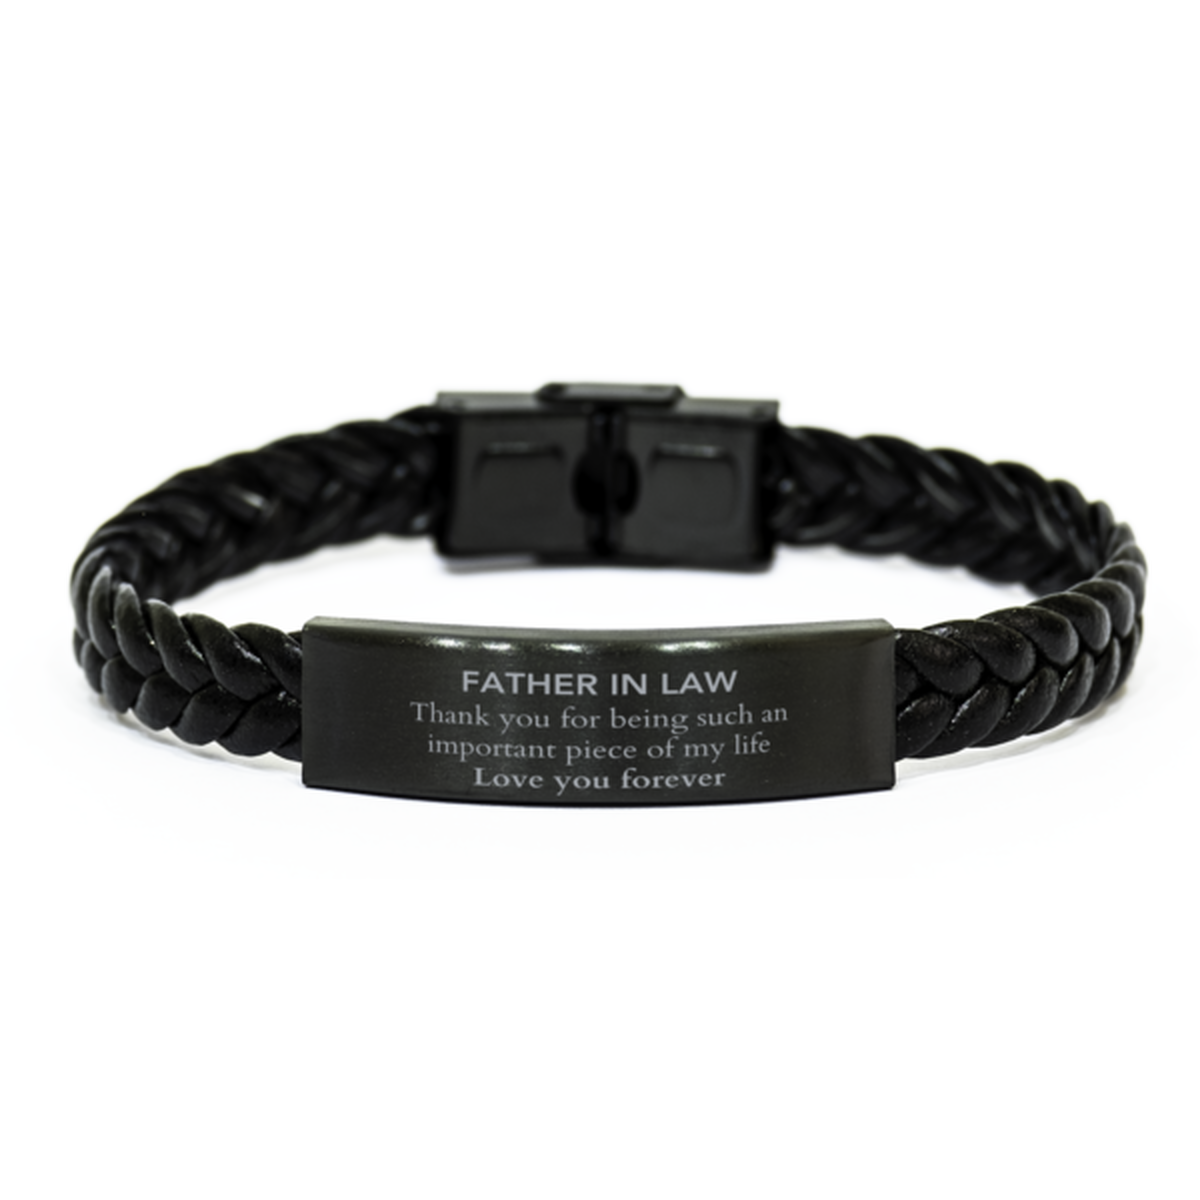 Appropriate Father In Law Braided Leather Bracelet Epic Birthday Gifts for Father In Law Thank you for being such an important piece of my life Father In Law Christmas Mothers Fathers Day